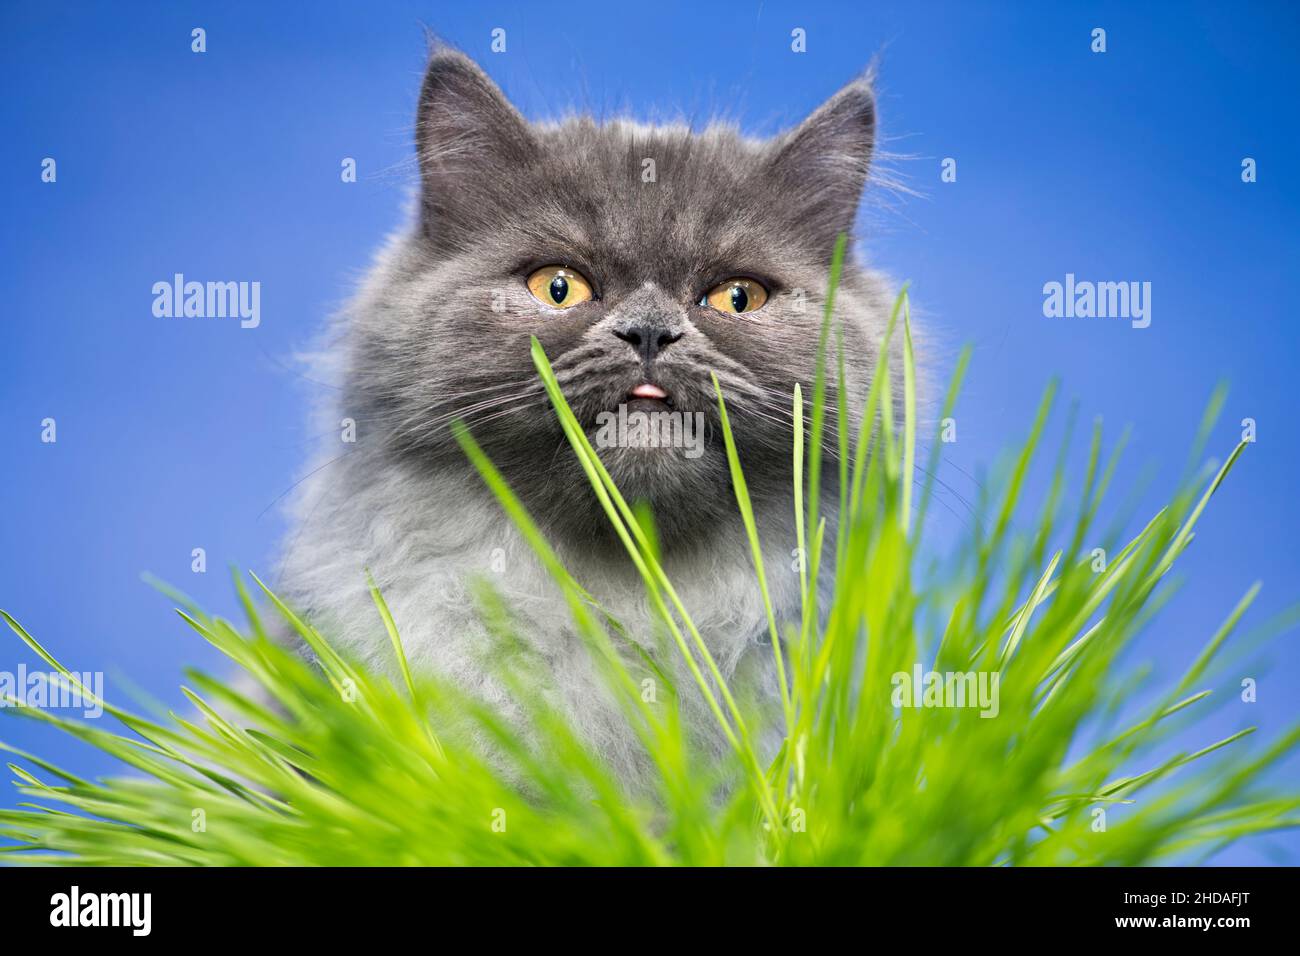 Funny grey cat with his tongue out, looking through green blades of grass. Stock Photo